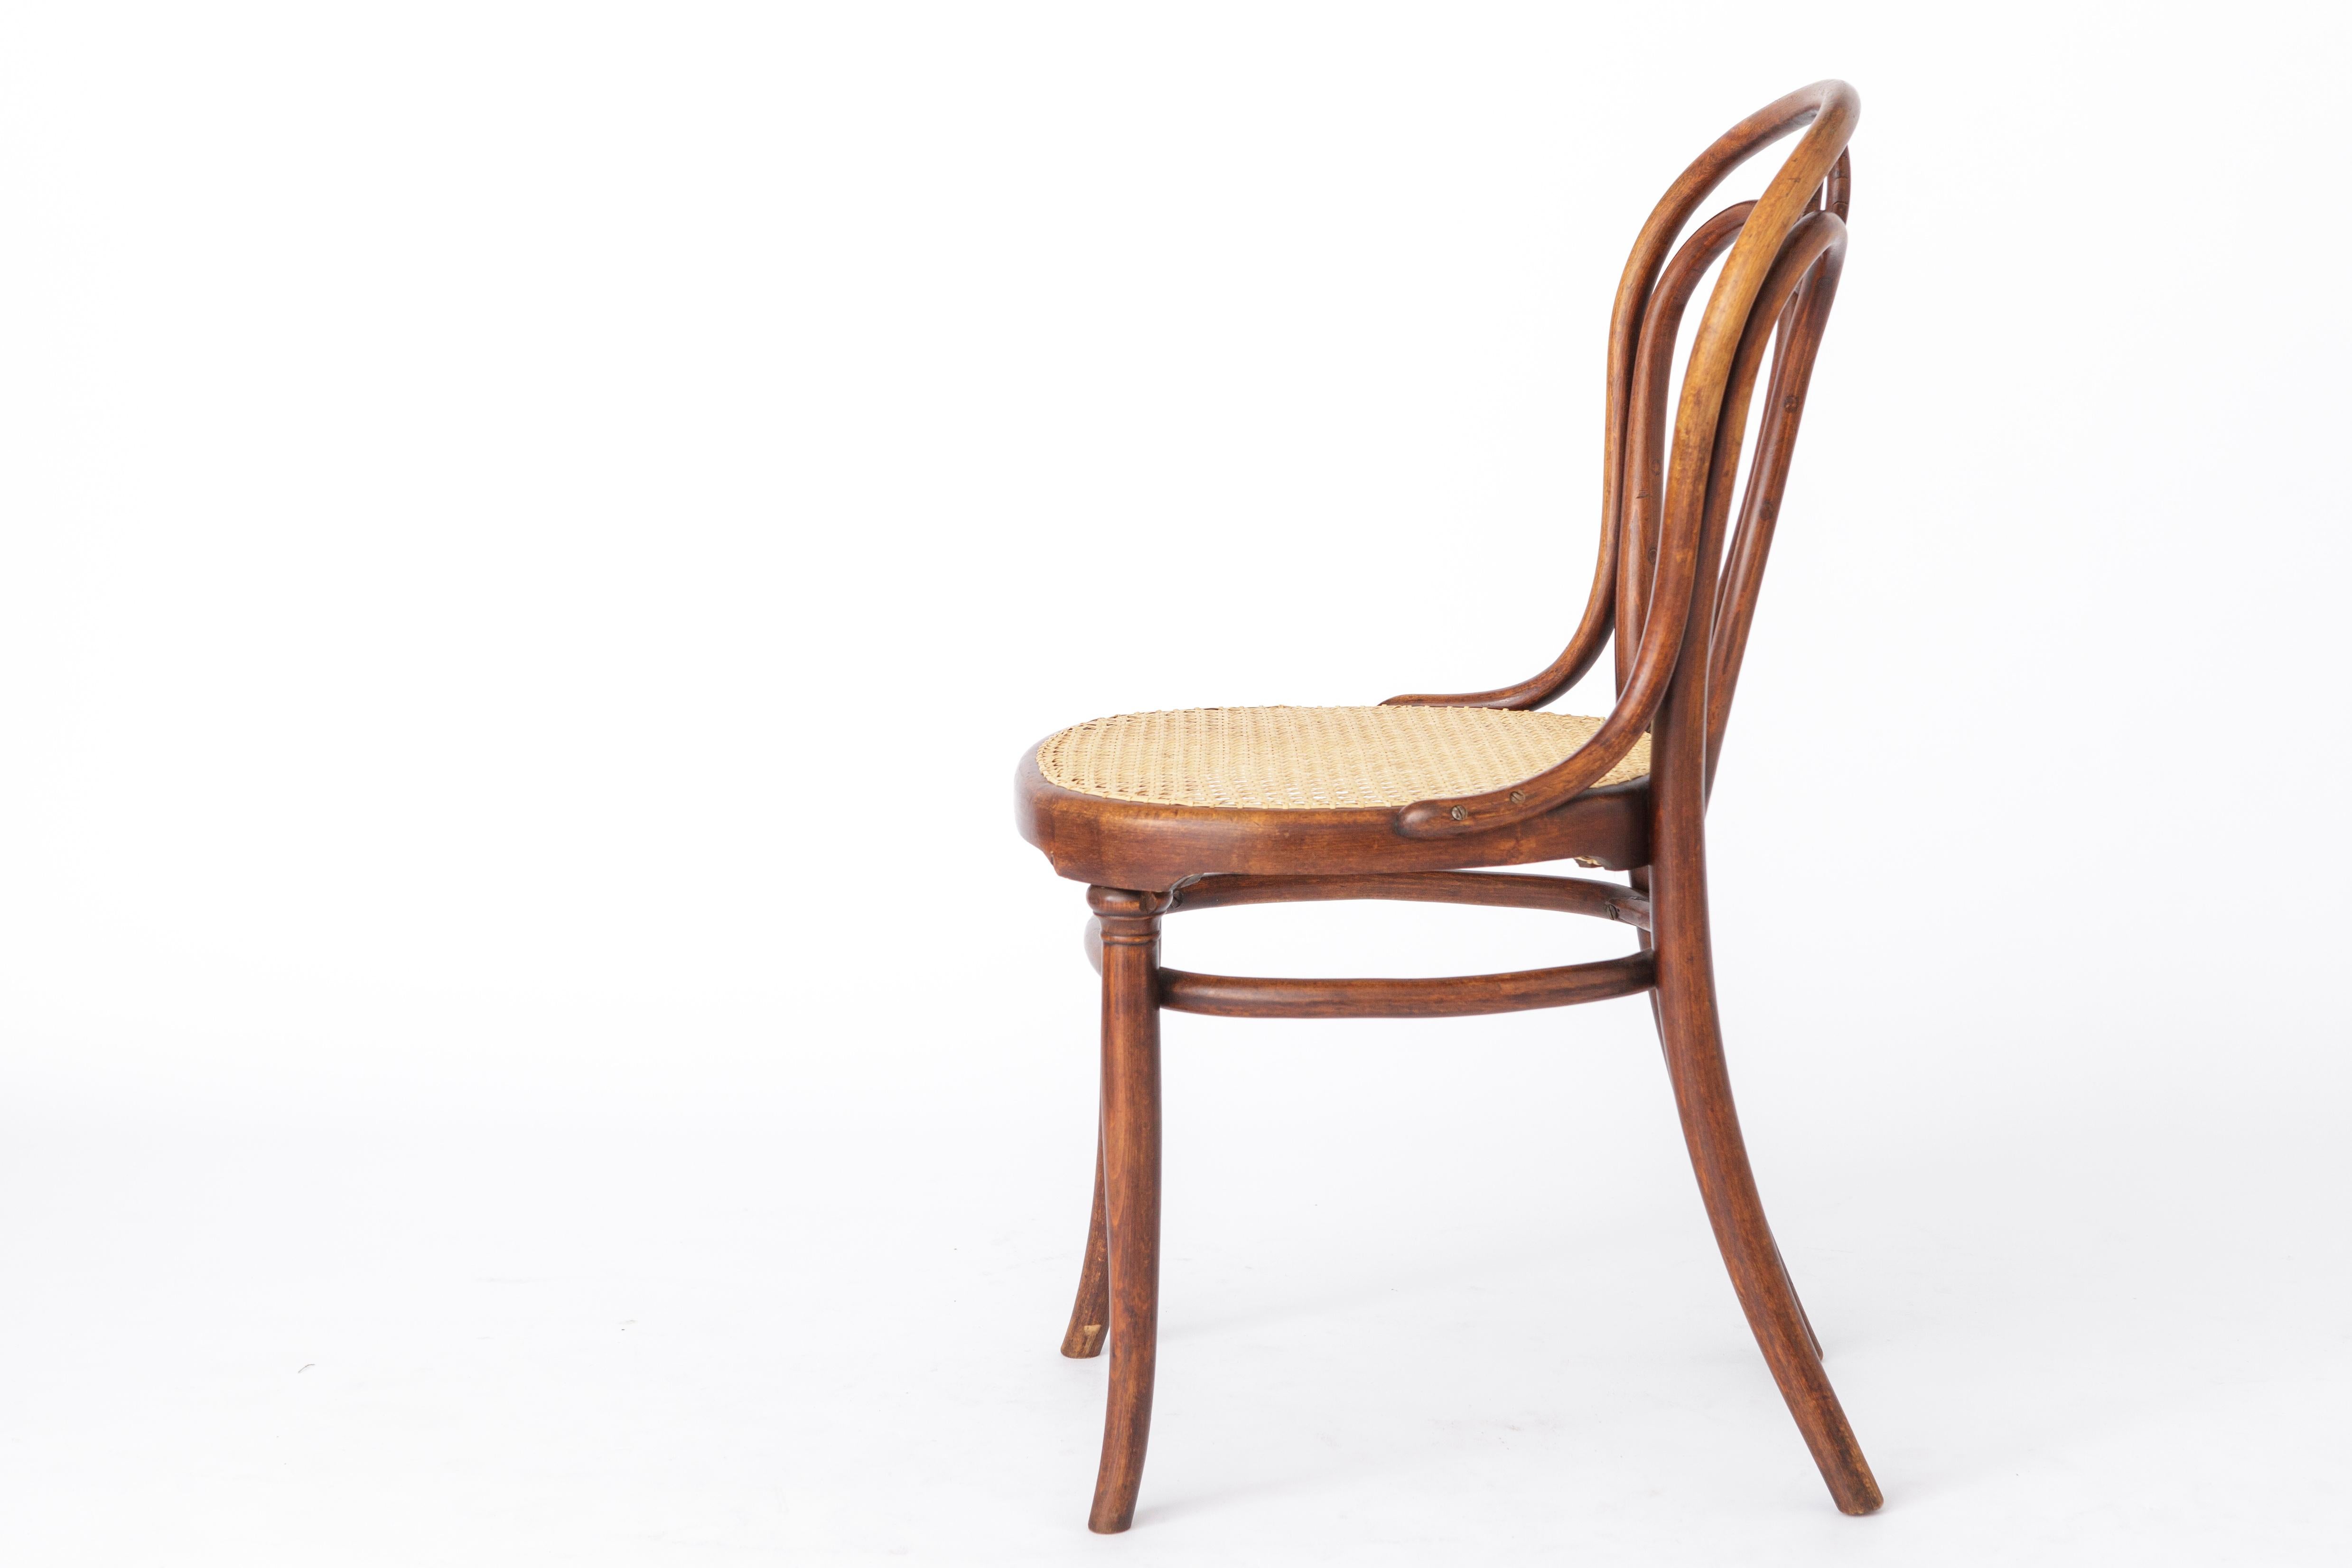 Danish Thonet Chair No. 19 with Viennese cain 1880s - Angel chair - desk chair